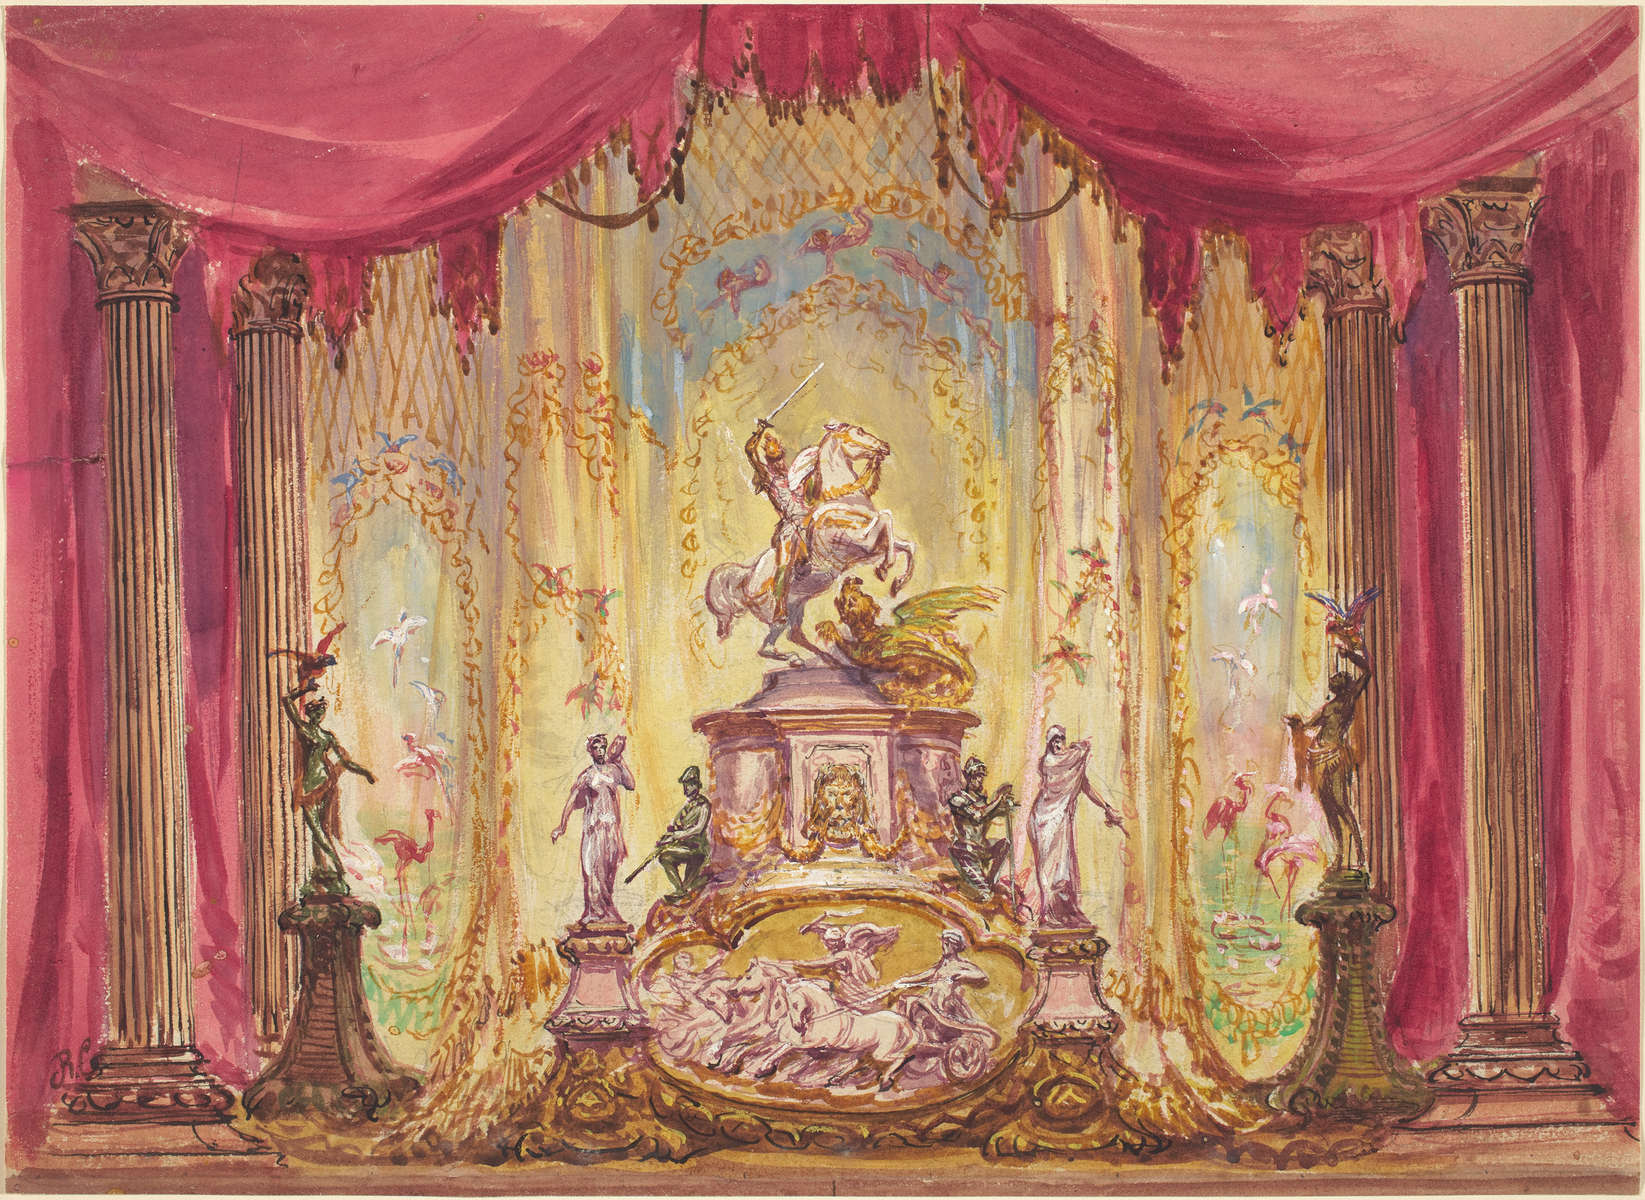 Robert Caney (British, 1847 - 1911 ), Stage Set With Statue Of St. George Slaying The Dragon, , watercolor and gouache with pen and black ink, heightened with white, over graphite on wove paper, Joseph F. McCrindle Collection